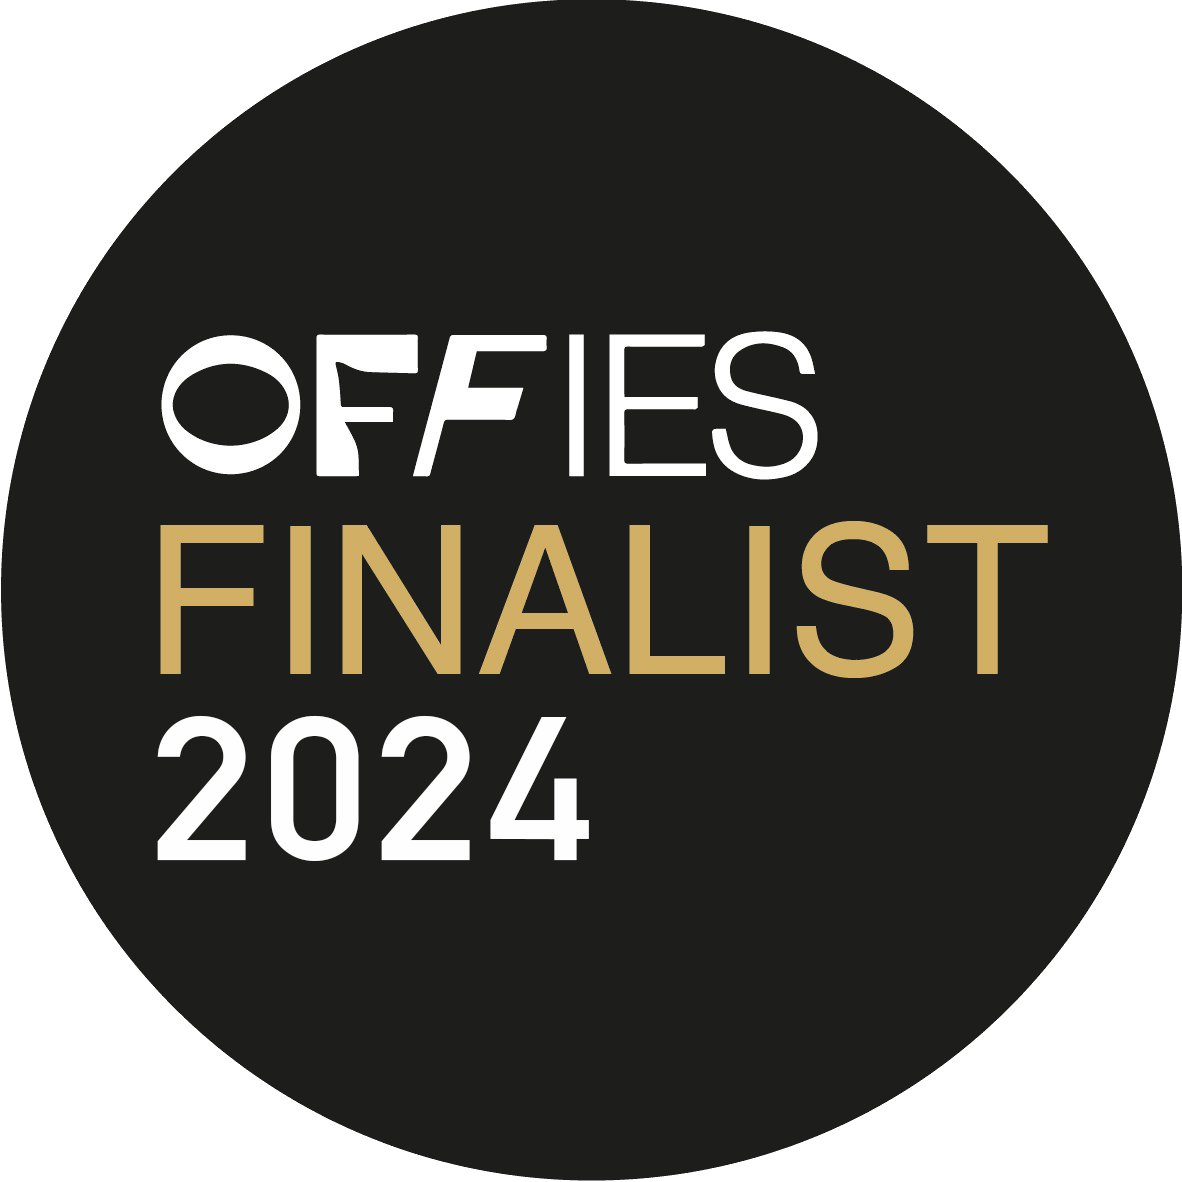 #OFFFEST 2024 FINALISTS: VAULT Festival @wearevault_: “How We Begin” from Surfacing Acts Theatre @how_begin in the Pit; “Locomotive for Murder: The Improvised Whodunnit” from @Pinchpunchimpro in the Crypt; “Sons” from Concept Theatre @ConceptTheatre at the Vaults